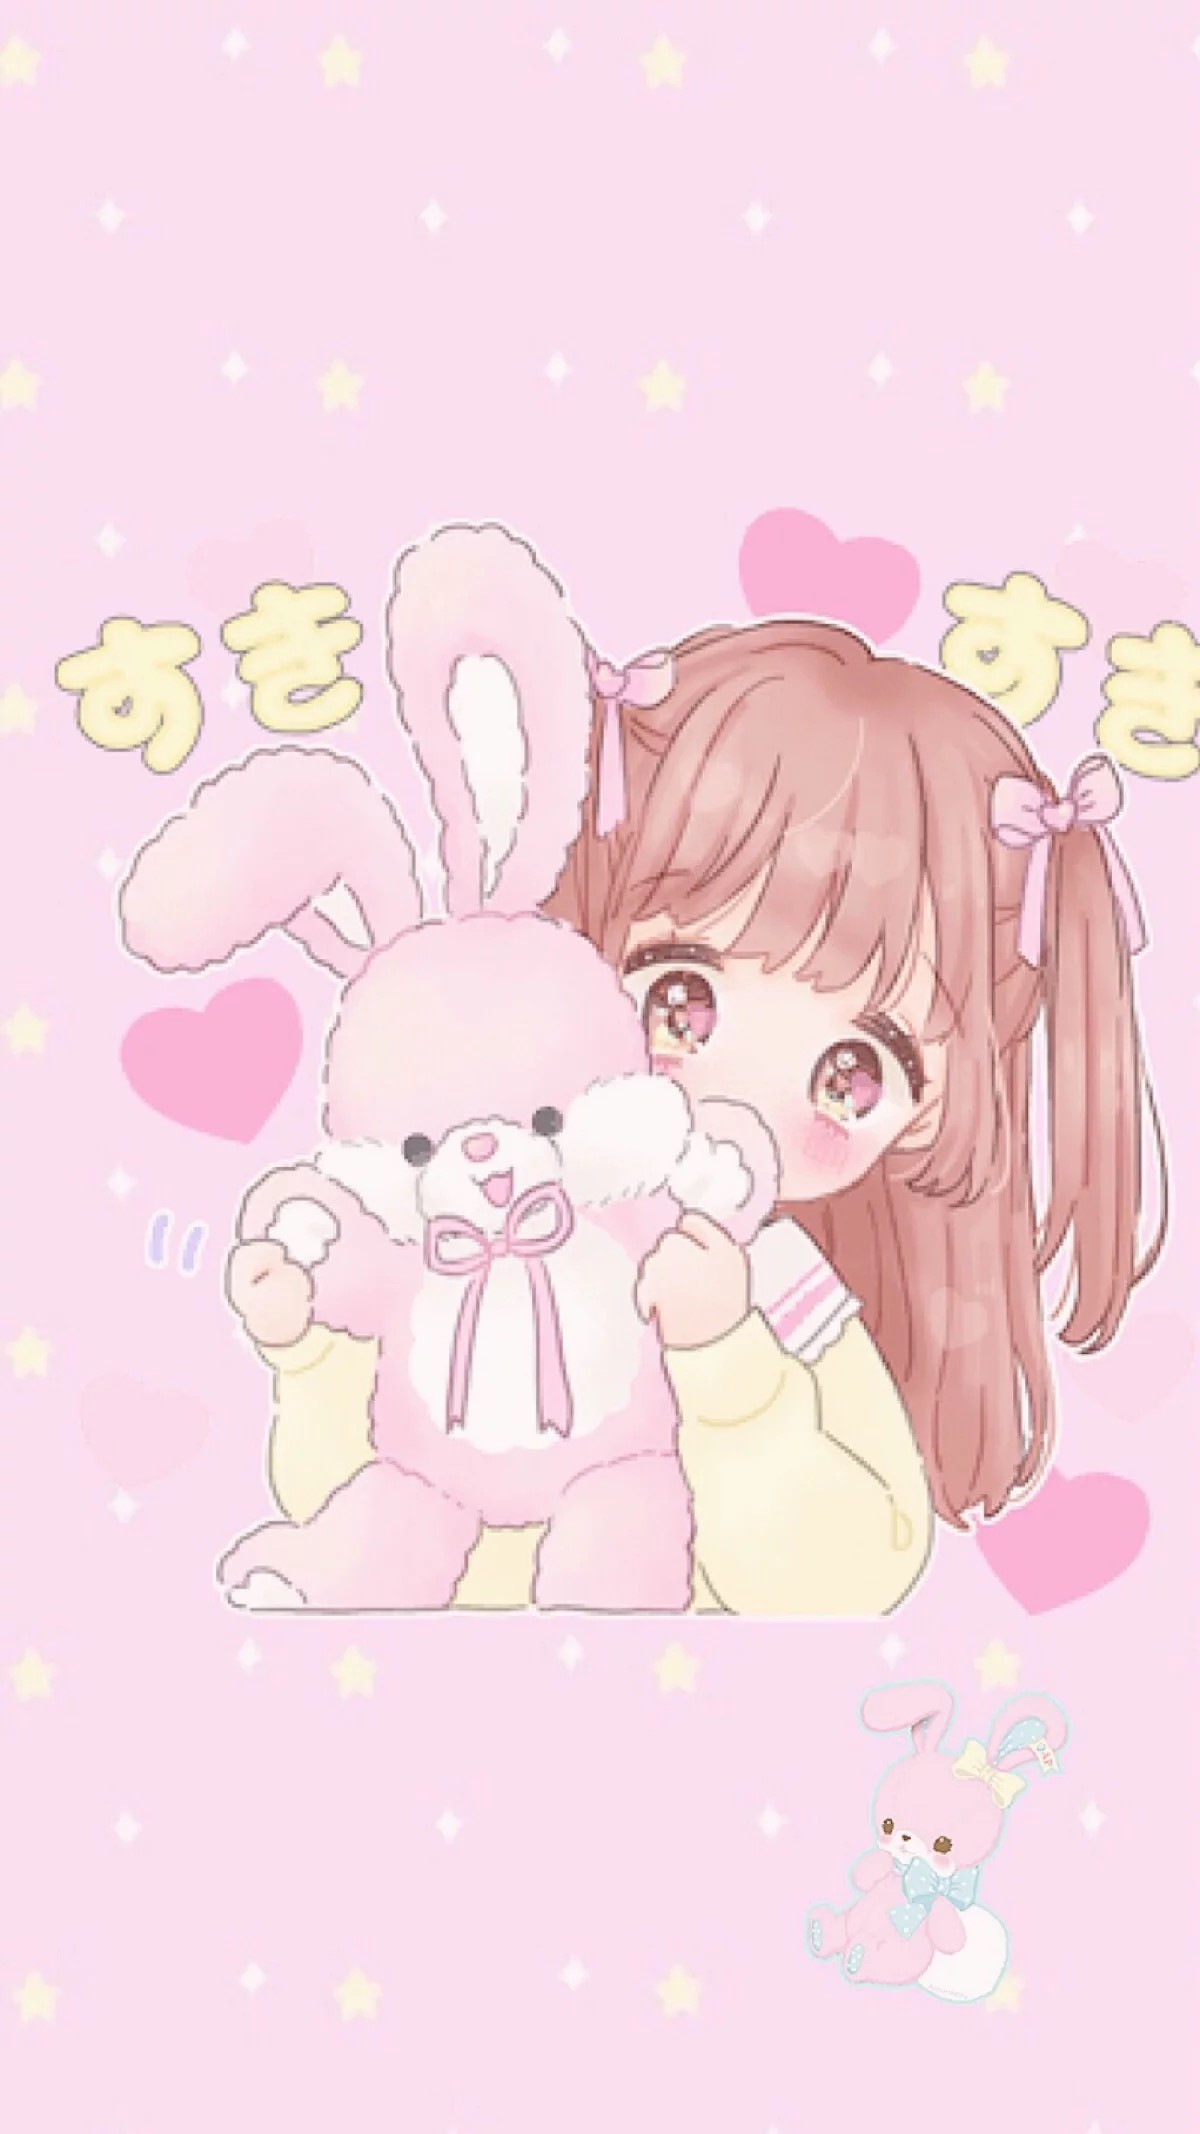 A little girl with a pink rabbit